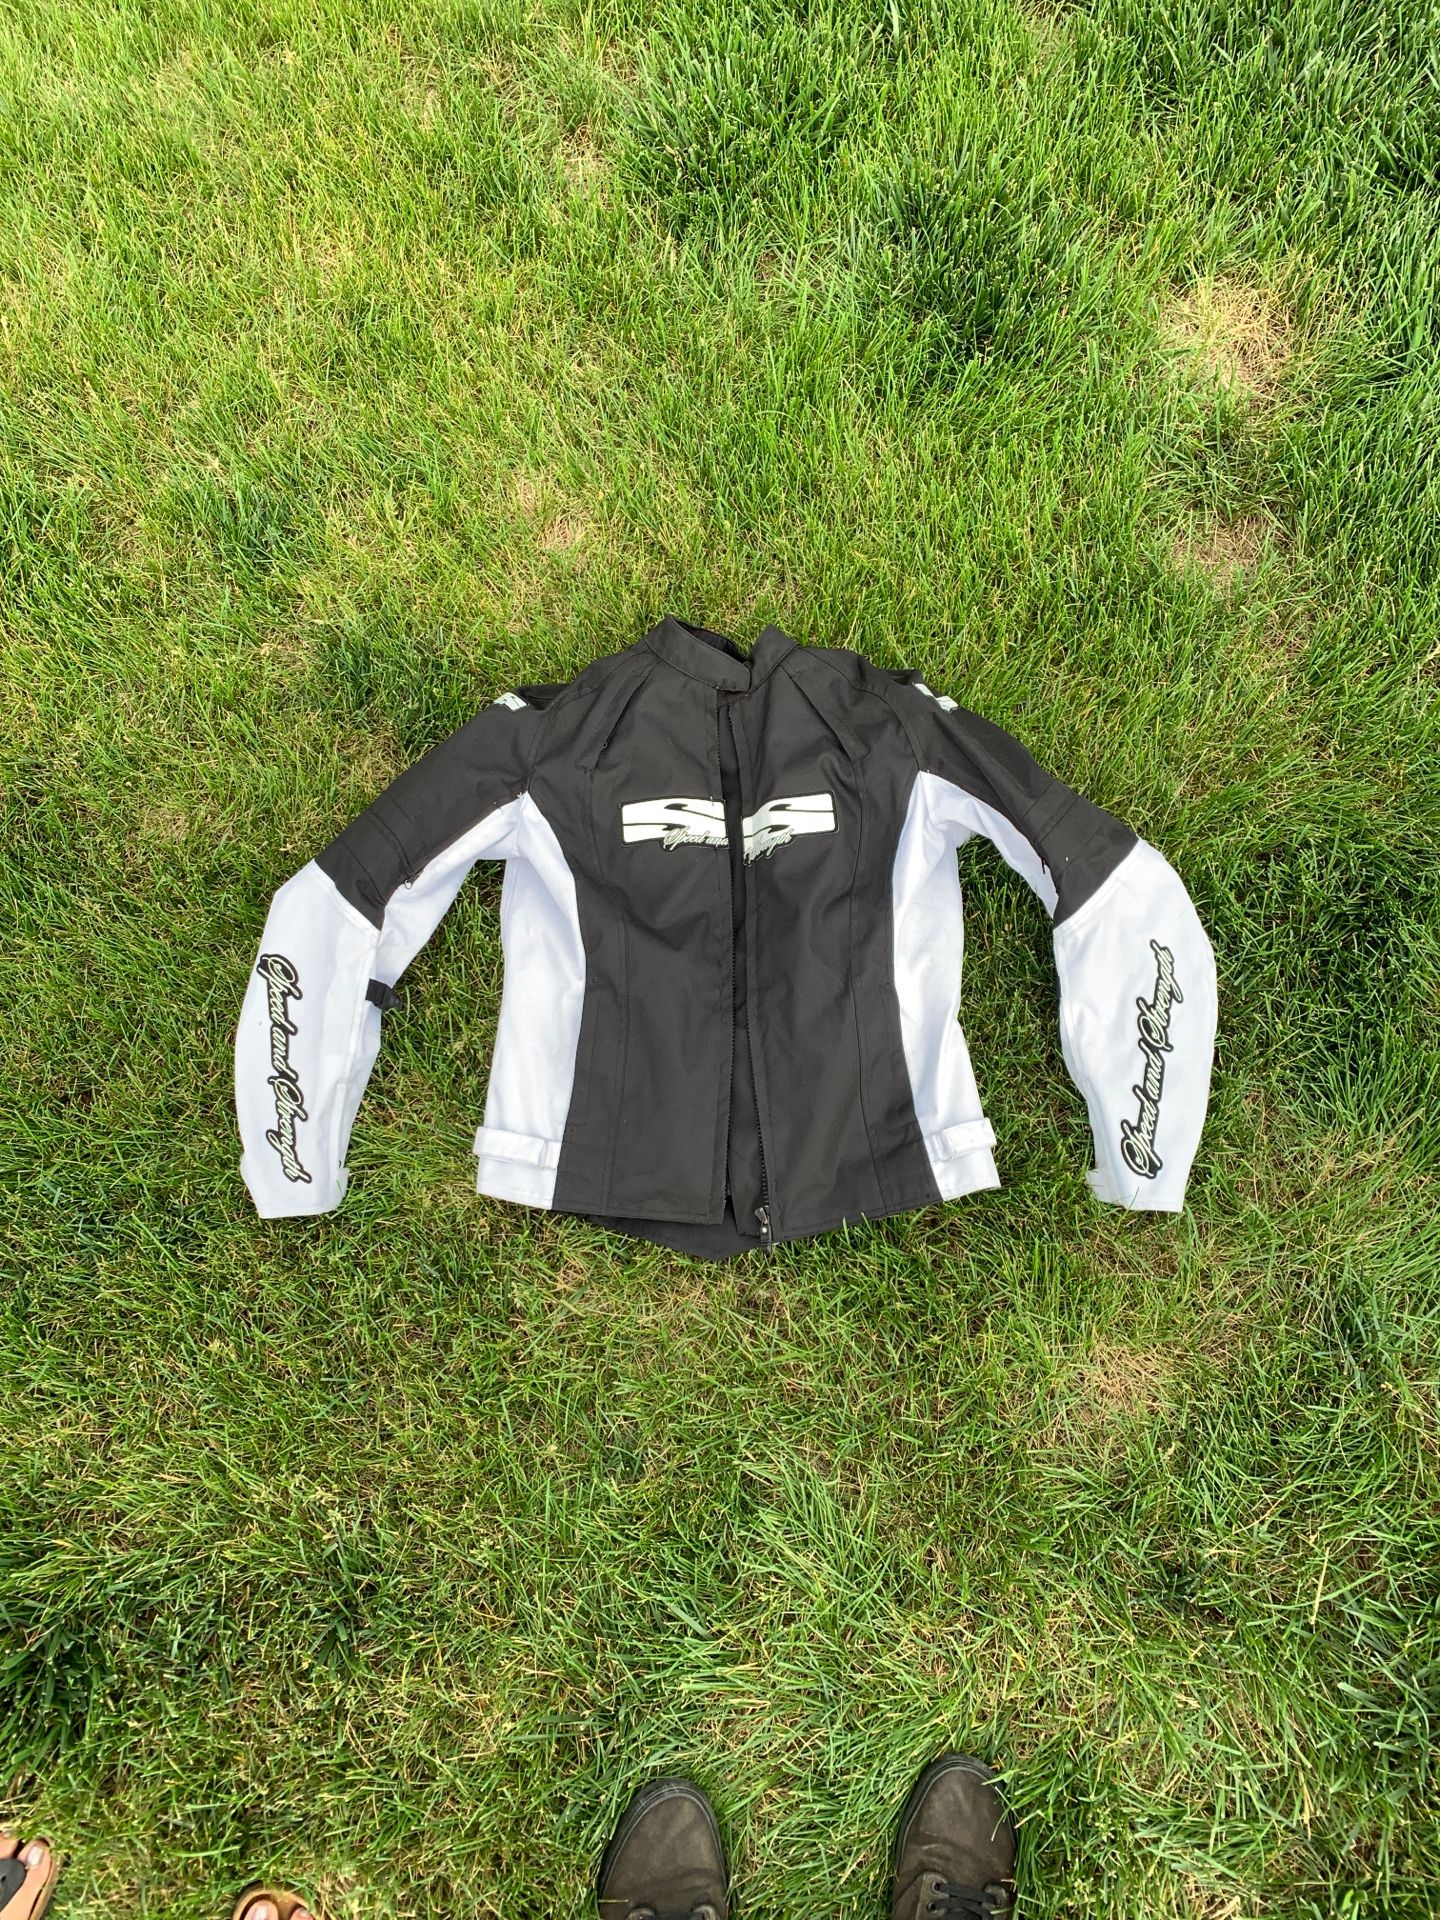 Women’s Medium, S&S motorcycle jacket with shoulder and back pads embedded